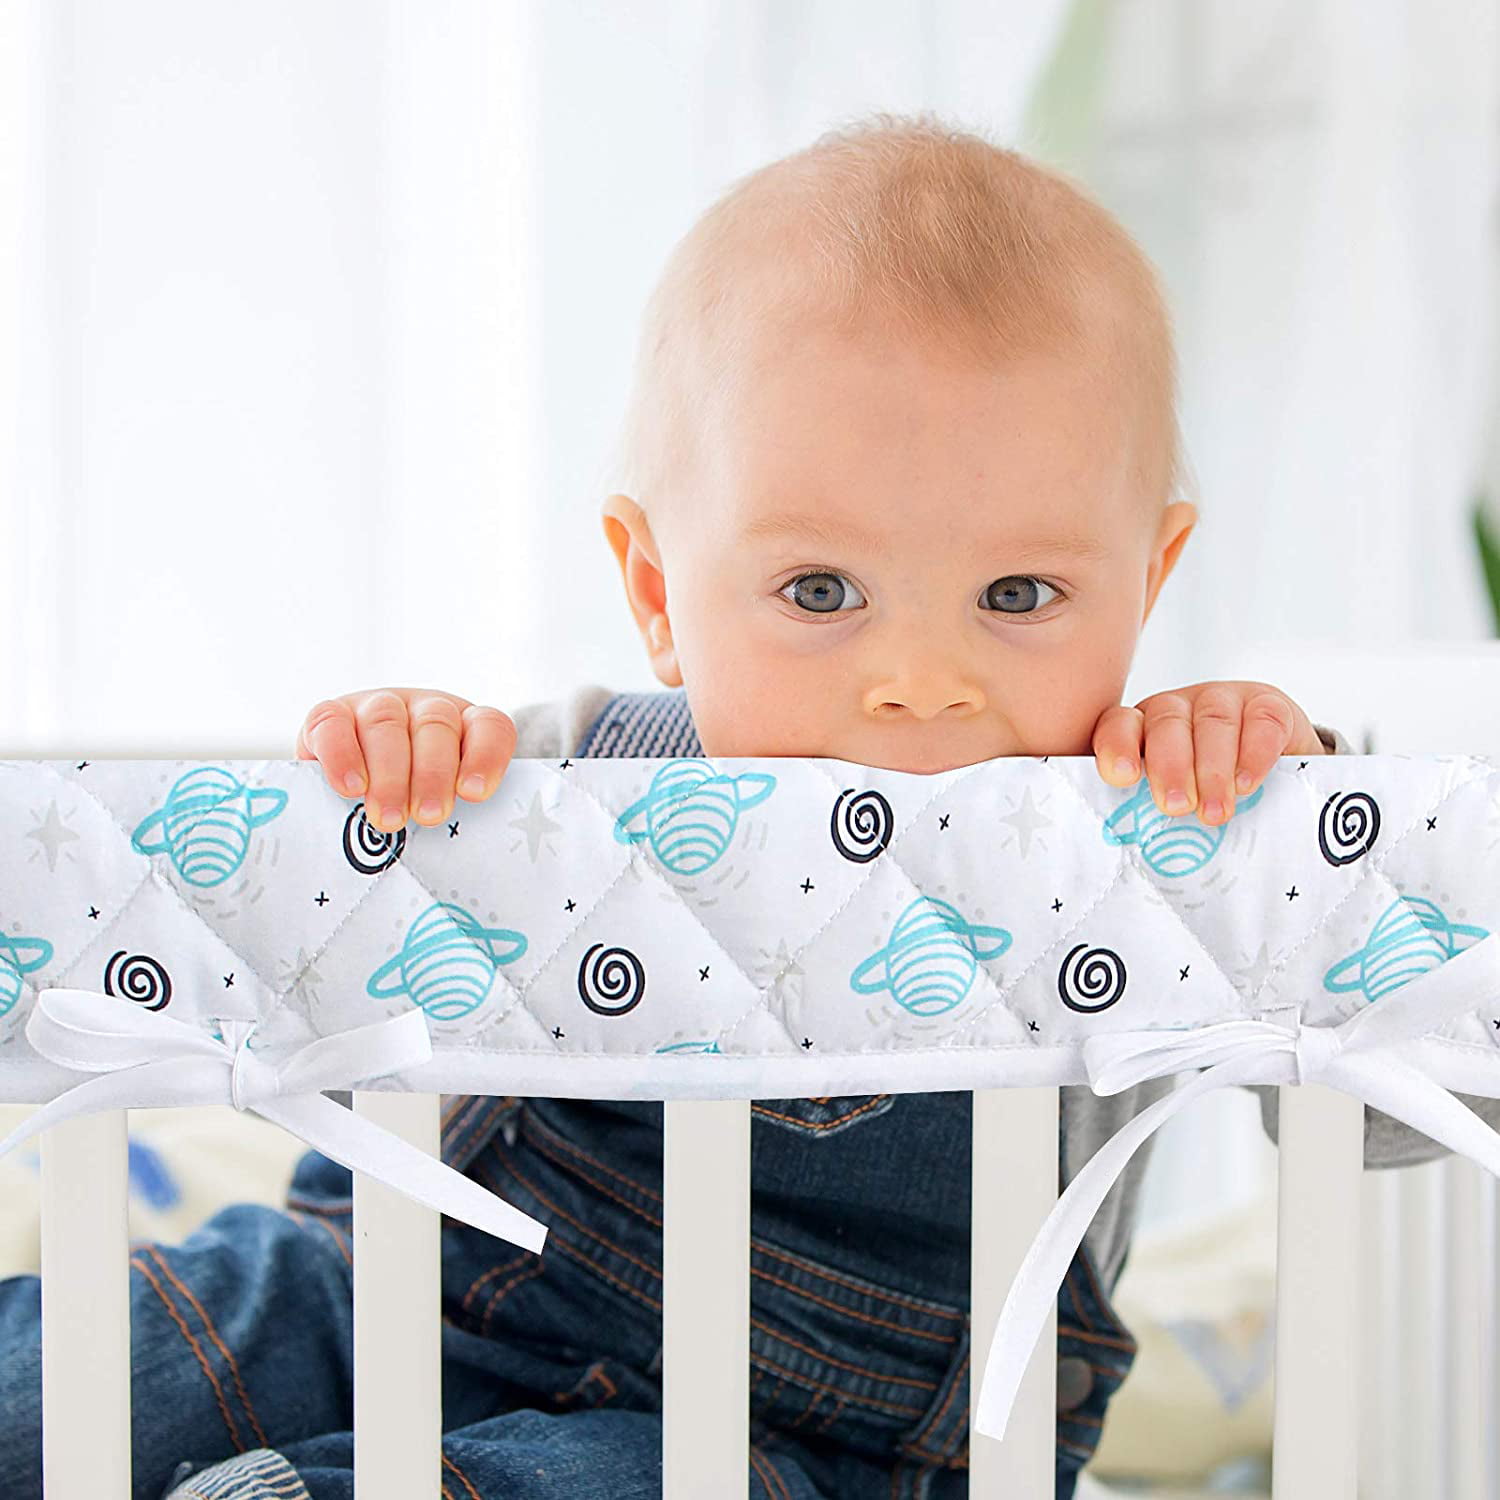 Reversible Rail Cover Set Fit for 4 Sides Standard Crib Measuring Up to 10 Around Safe Teething Guard Wrap for Boys and Girls Baby Crib Rail Cover Protector Padded 4 Piece Grey 